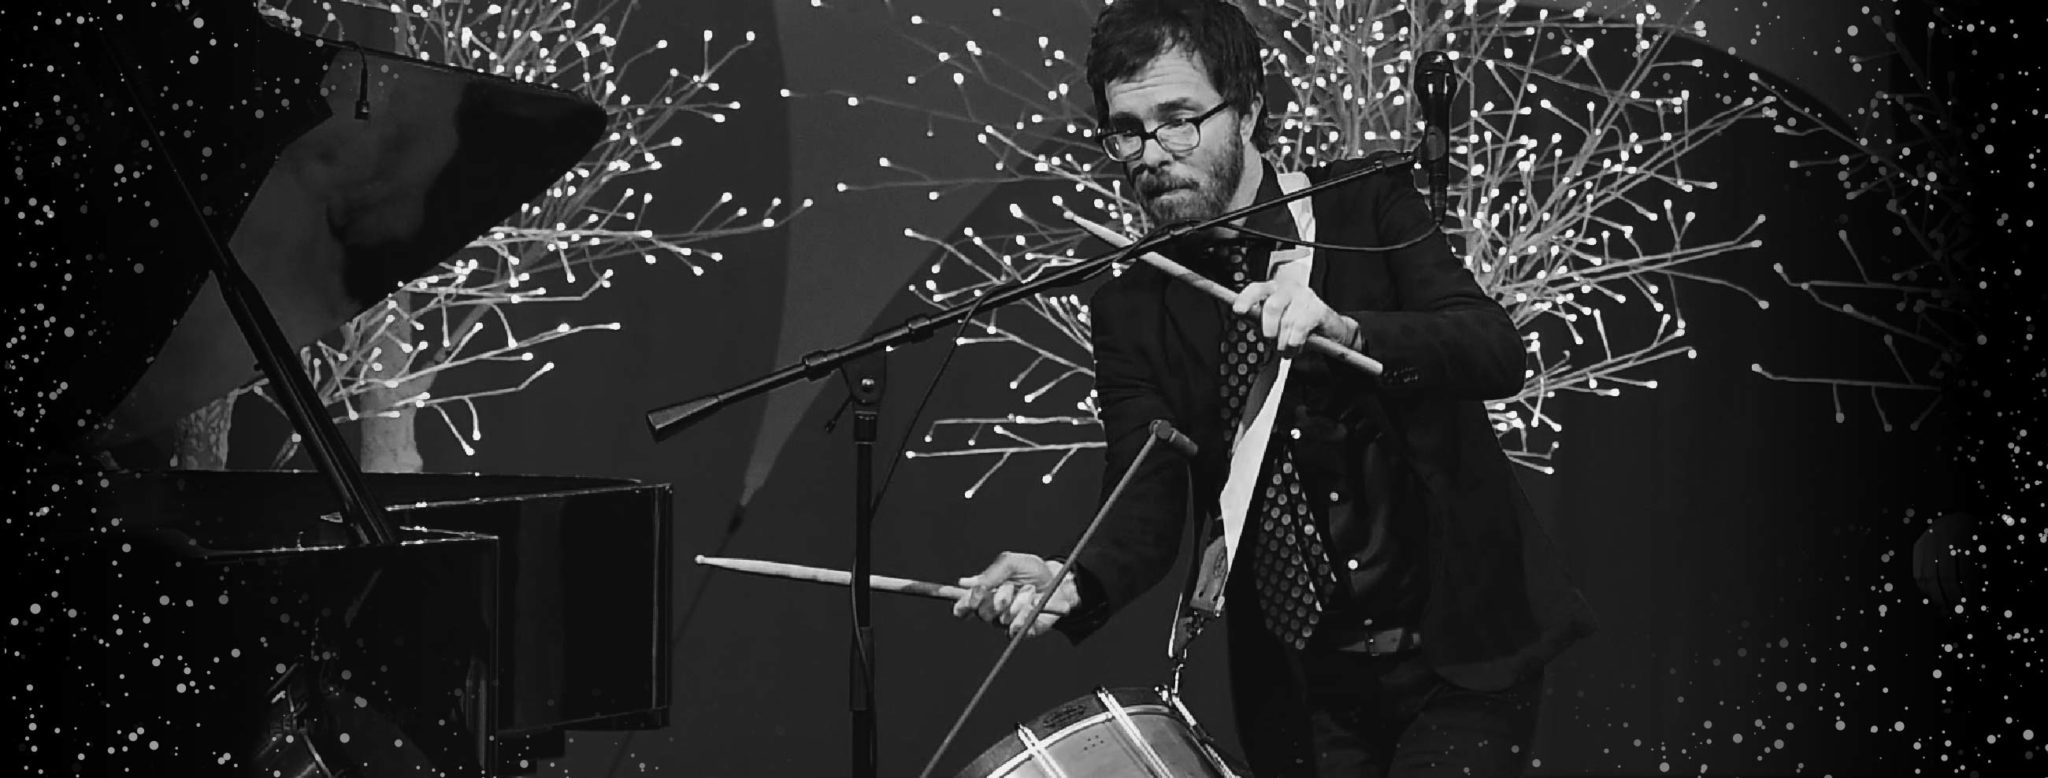 Singer-songwriter Ben Folds, host and headliner of this 2018 holiday music TV special, plays the snare drum. (Copyright: Meredith Nierman / WGBH)